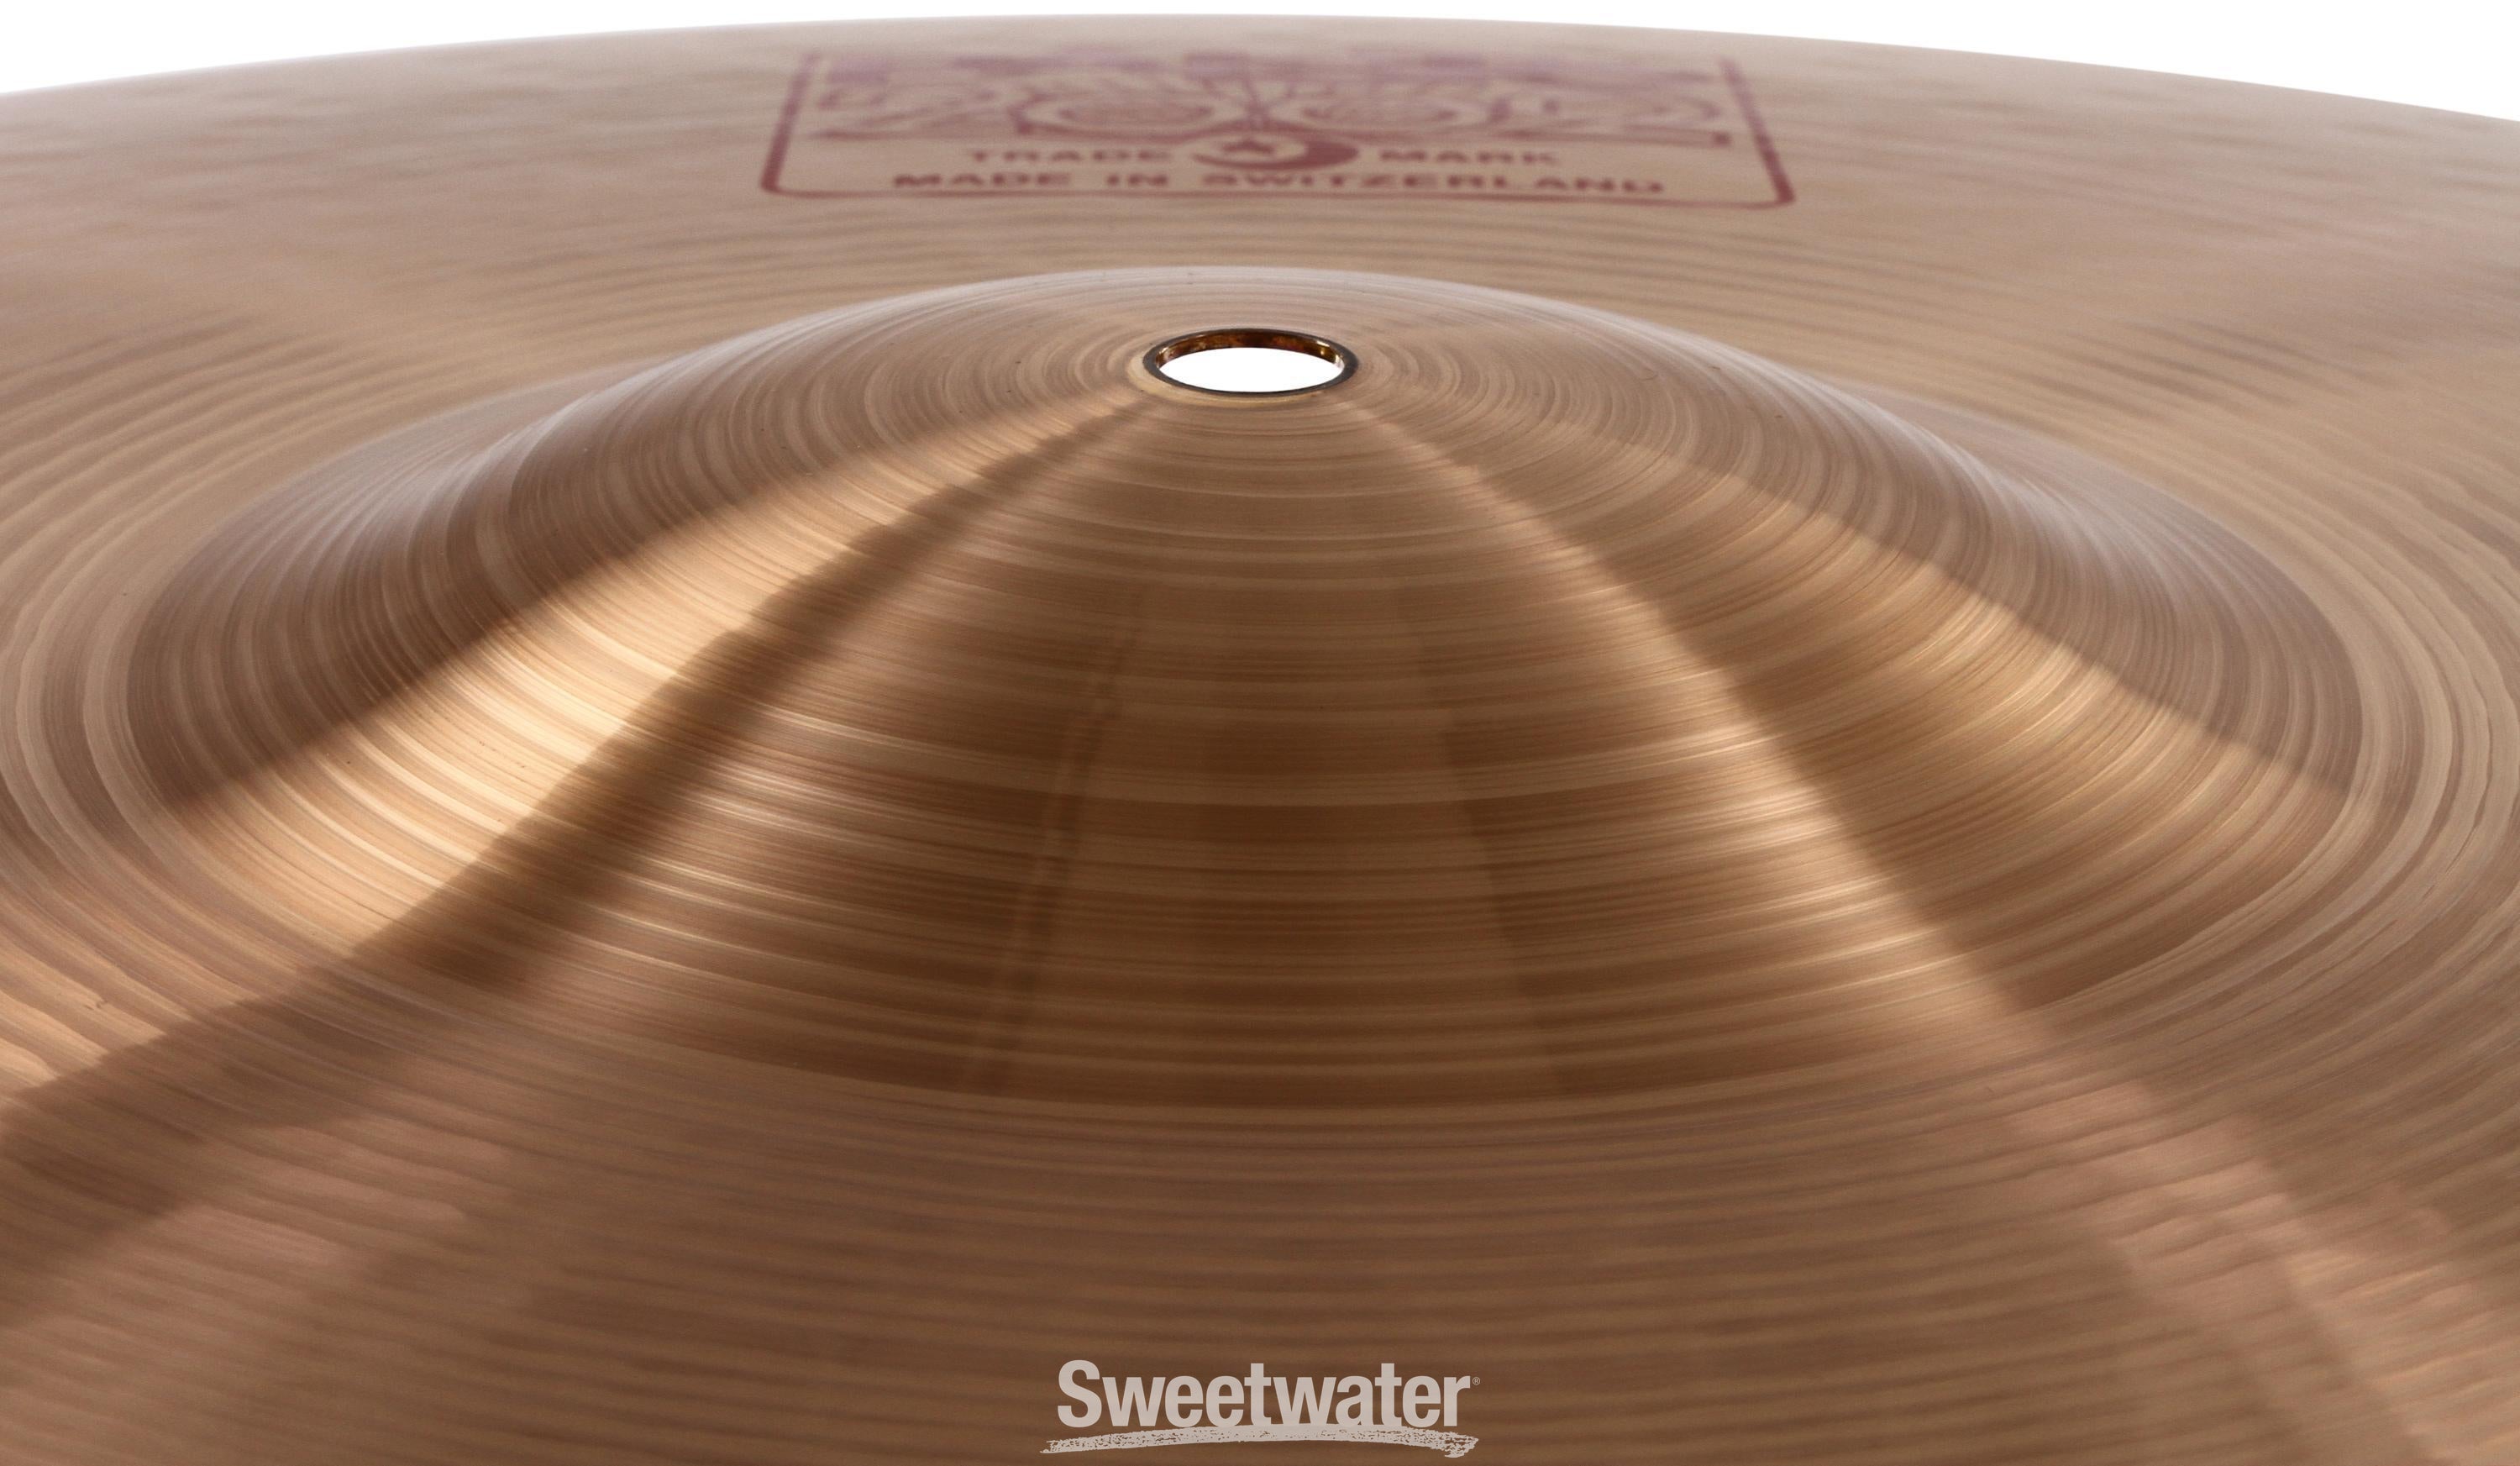 Paiste 19 inch 2002 Extreme Crash Cymbal | Sweetwater